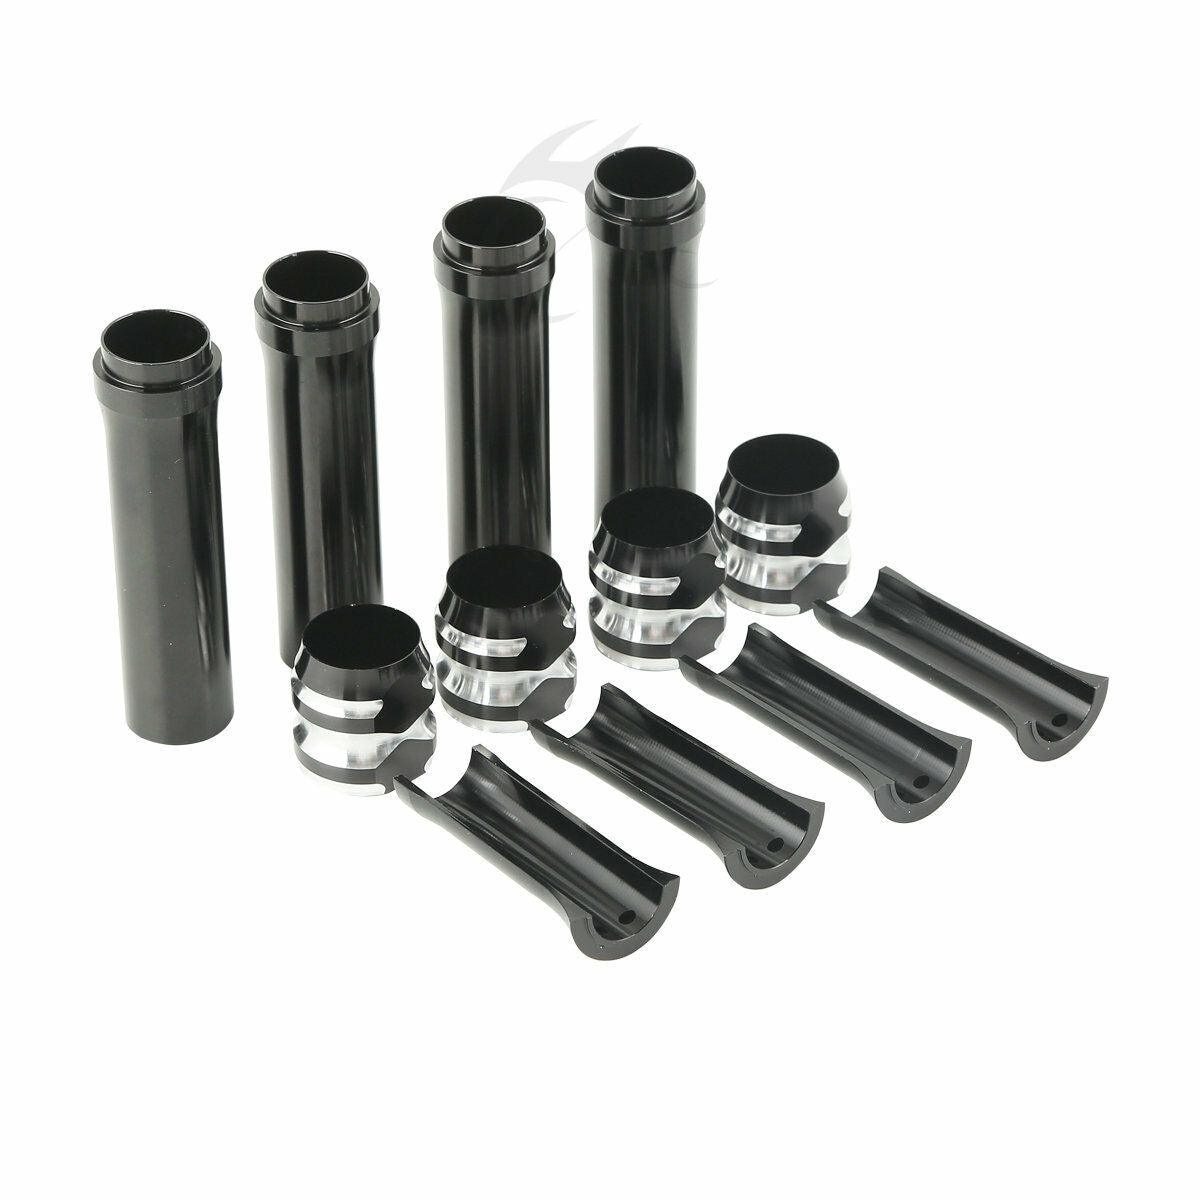 Black Aluminum Pushrod Tube Covers Lower Fit For Harley Twin Cam 1999-2017 2016 - Moto Life Products